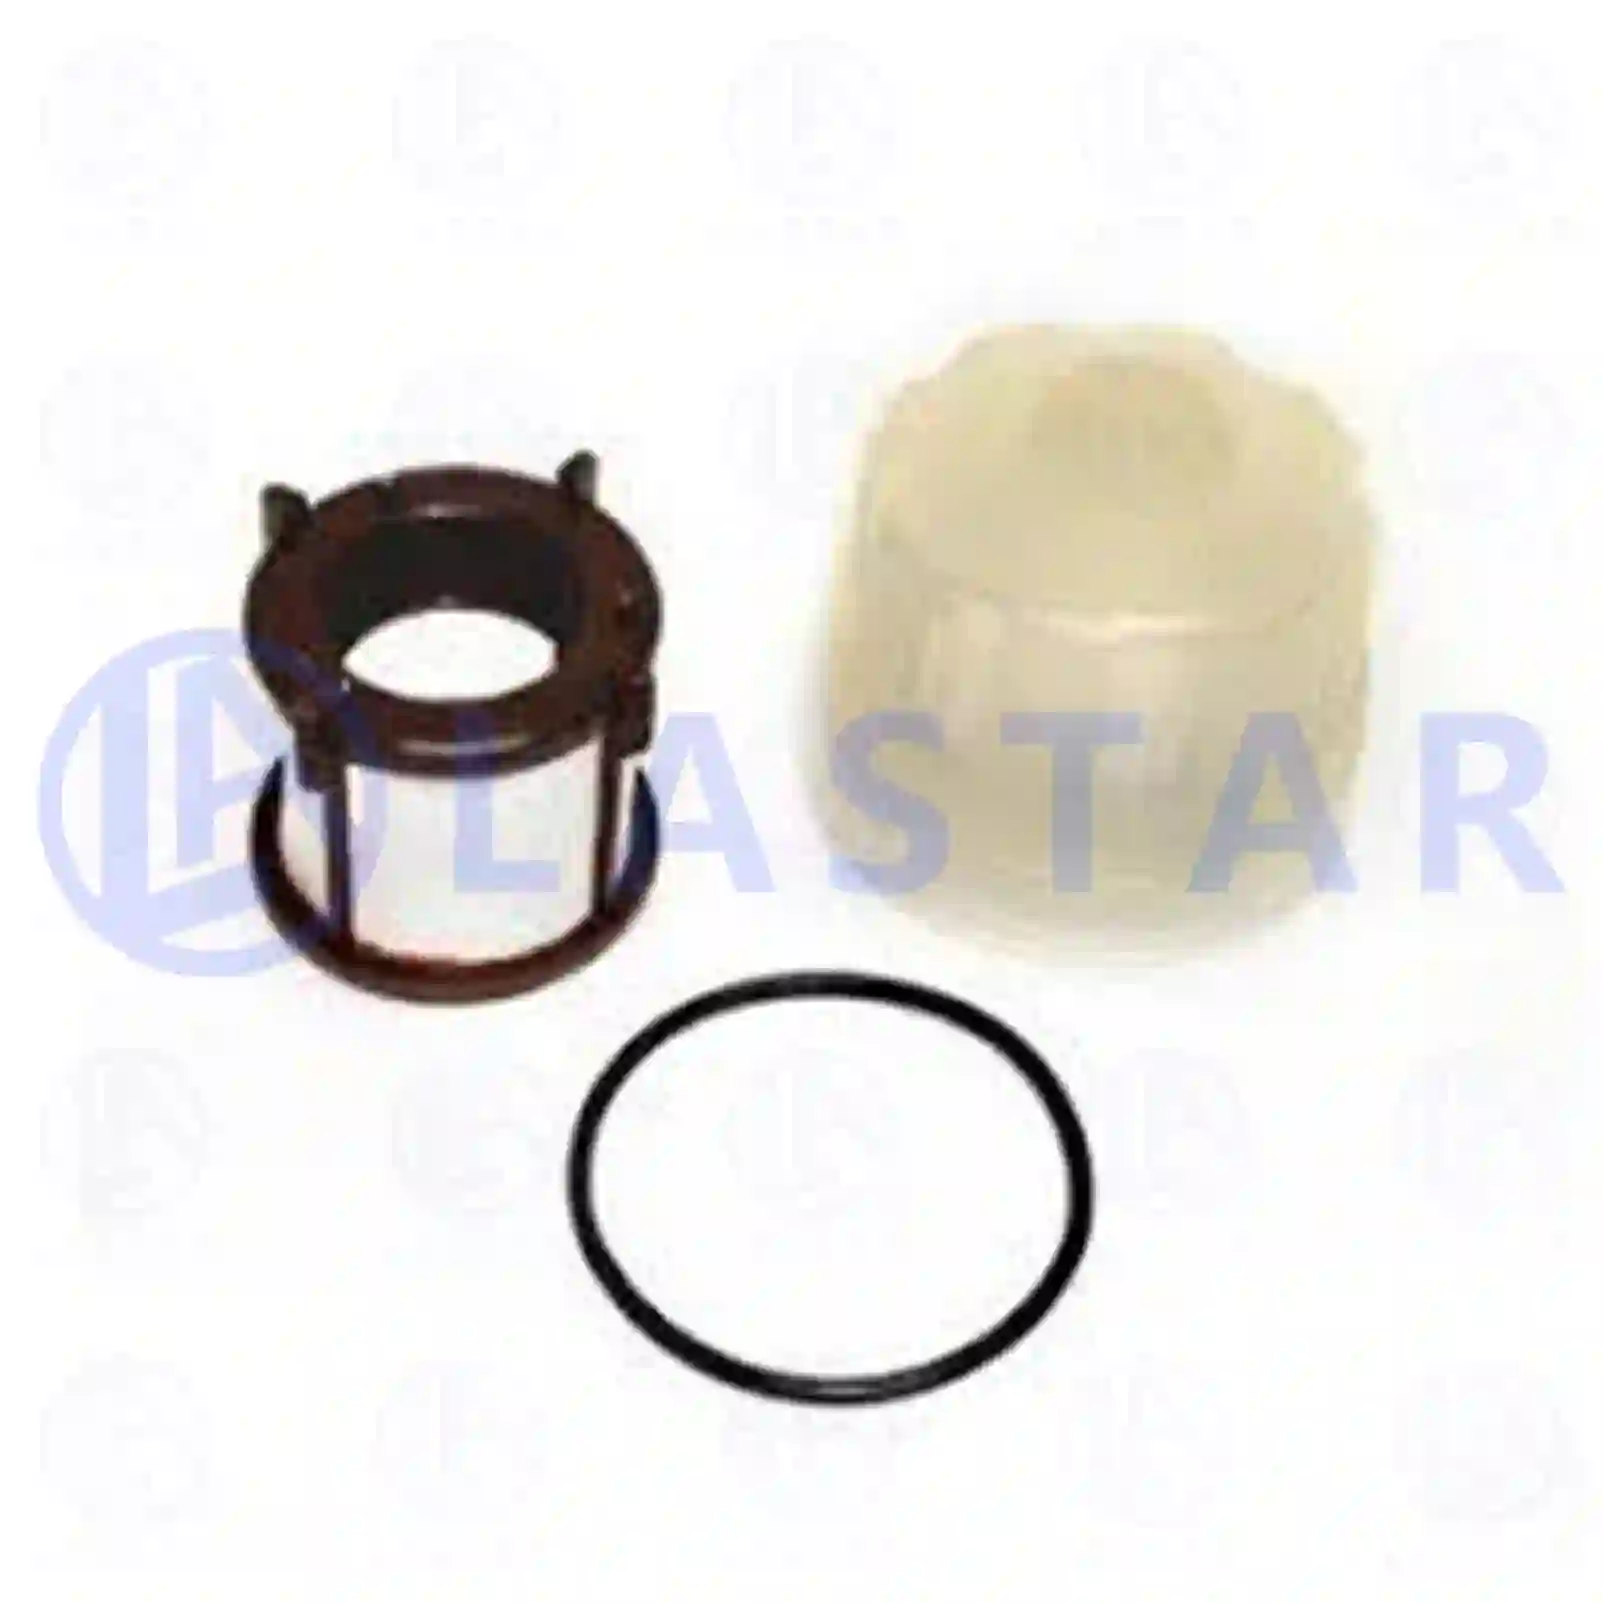 Filter repair kit, without filter housing, 77723267, 1438836, 1527478, 1529699, 1534424, 1683353, 571571308, 51125030043, 0000900751, 0000901351, 0000902051, 5001852912, 7424993611, ZG10413-0008 ||  77723267 Lastar Spare Part | Truck Spare Parts, Auotomotive Spare Parts Filter repair kit, without filter housing, 77723267, 1438836, 1527478, 1529699, 1534424, 1683353, 571571308, 51125030043, 0000900751, 0000901351, 0000902051, 5001852912, 7424993611, ZG10413-0008 ||  77723267 Lastar Spare Part | Truck Spare Parts, Auotomotive Spare Parts